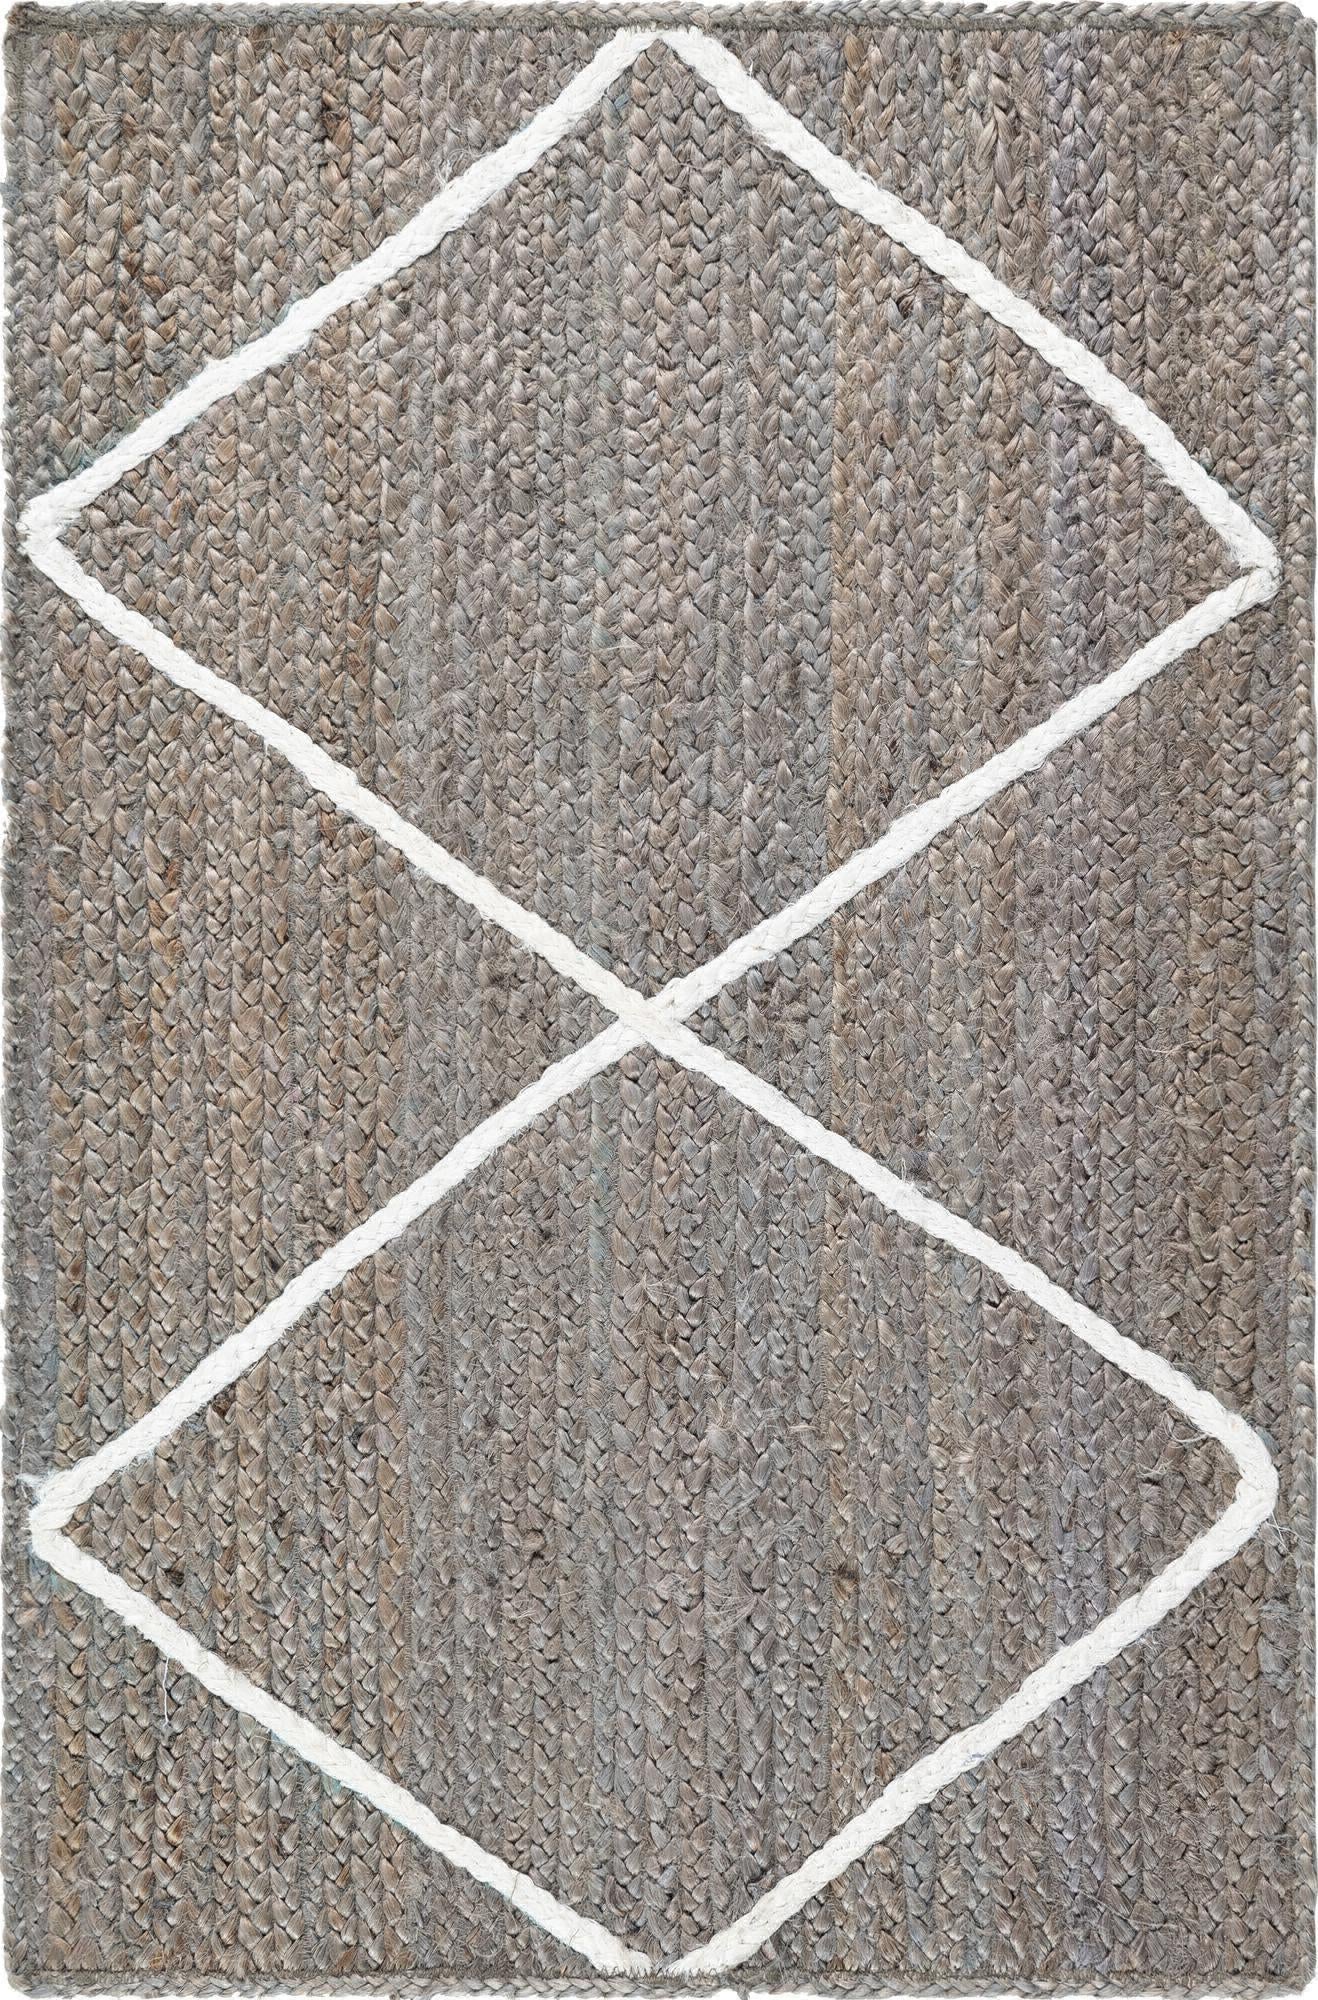 Unique Loom Braided Jute MGN-28 Gray Area Rug main image